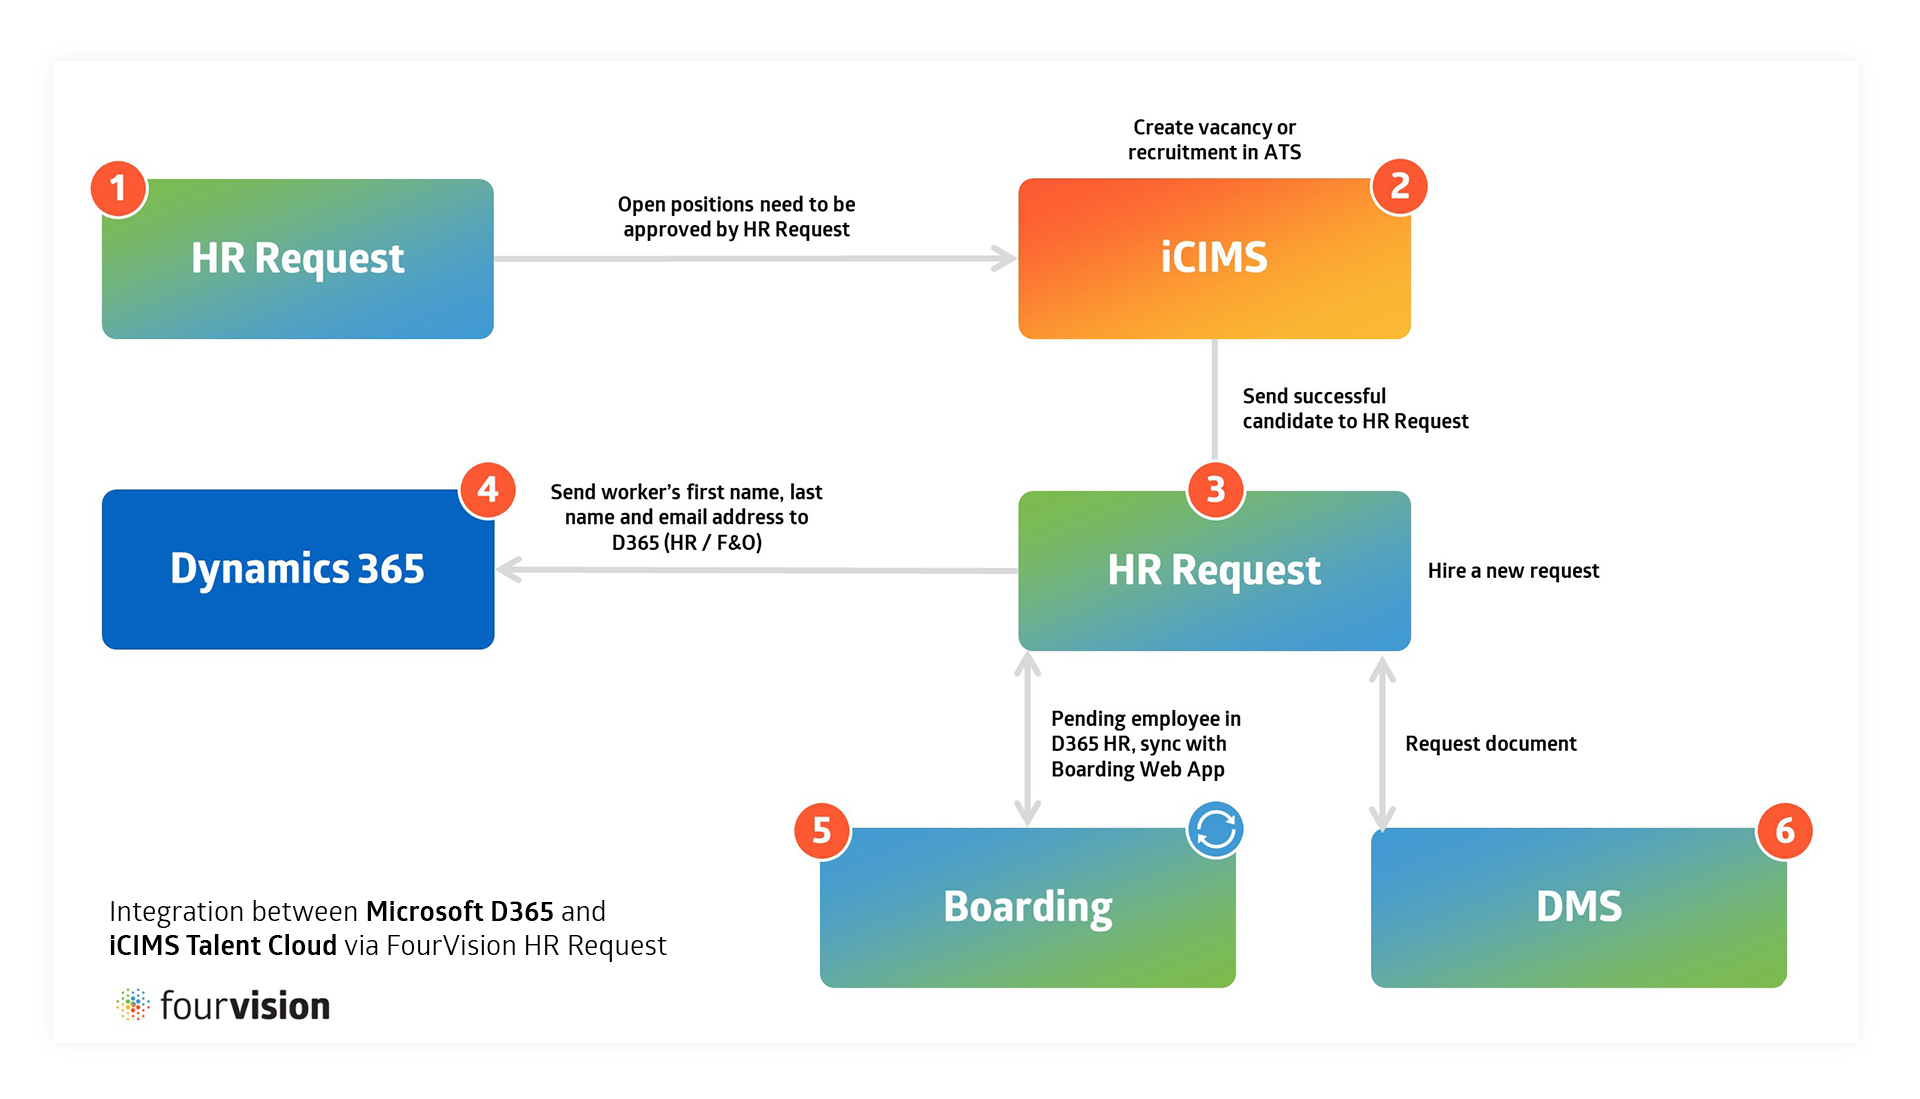 iCIMS and Dynamics 365 integration example with FourVision HR Request